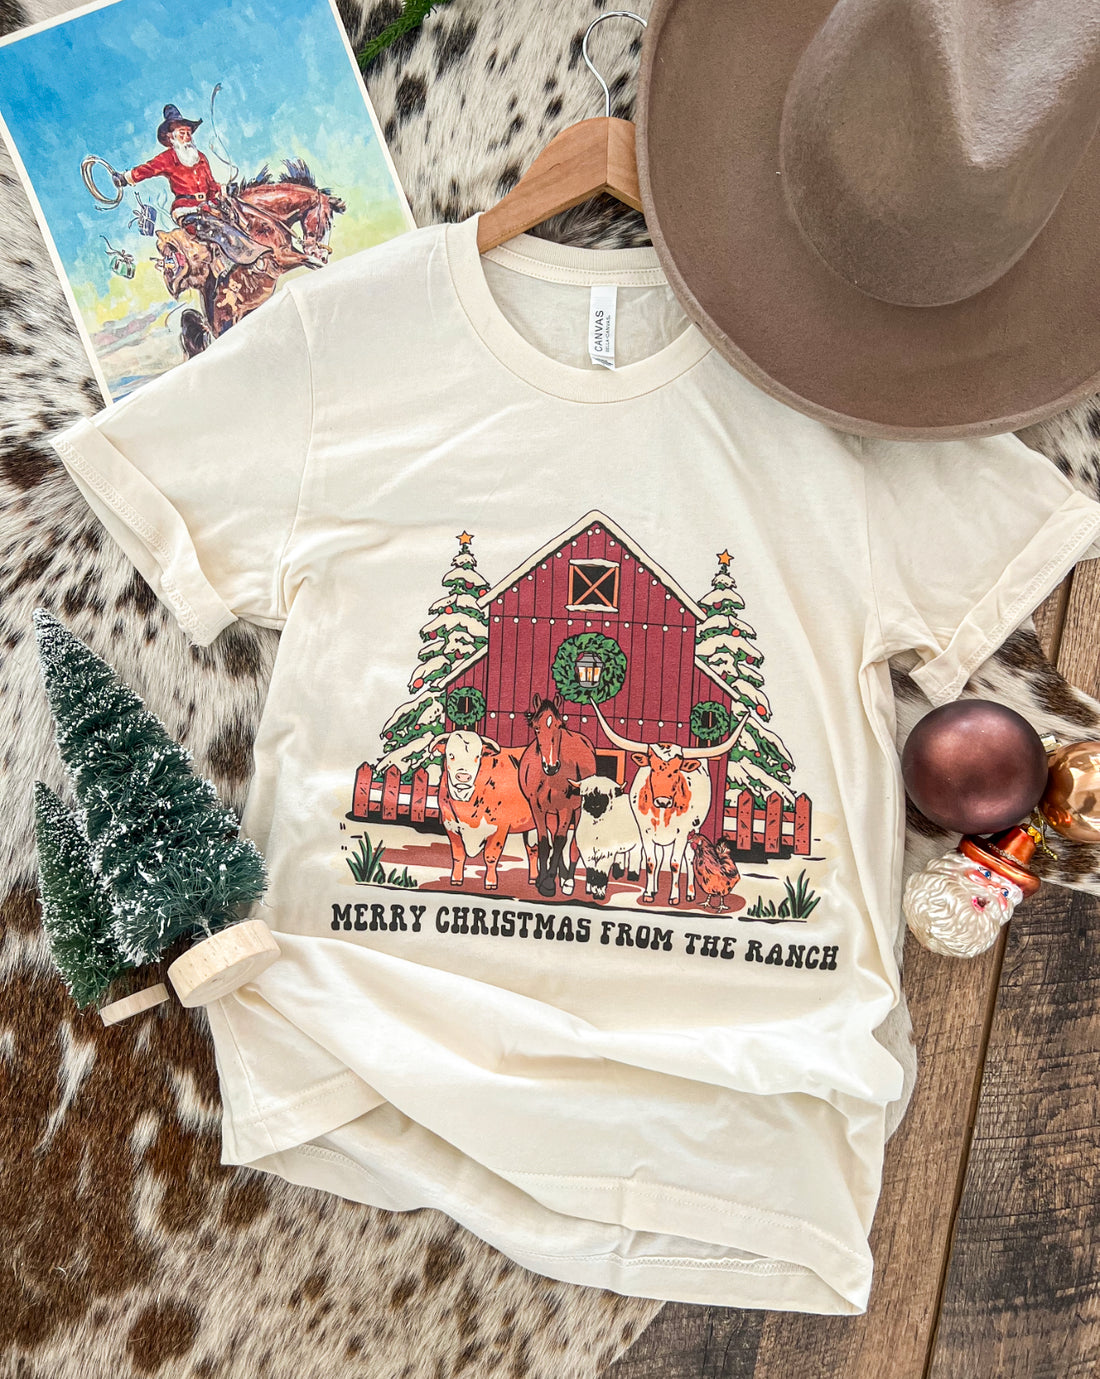 Merry Christmas From The Ranch Design Tee or Sweatshirt (cream) (Adult)